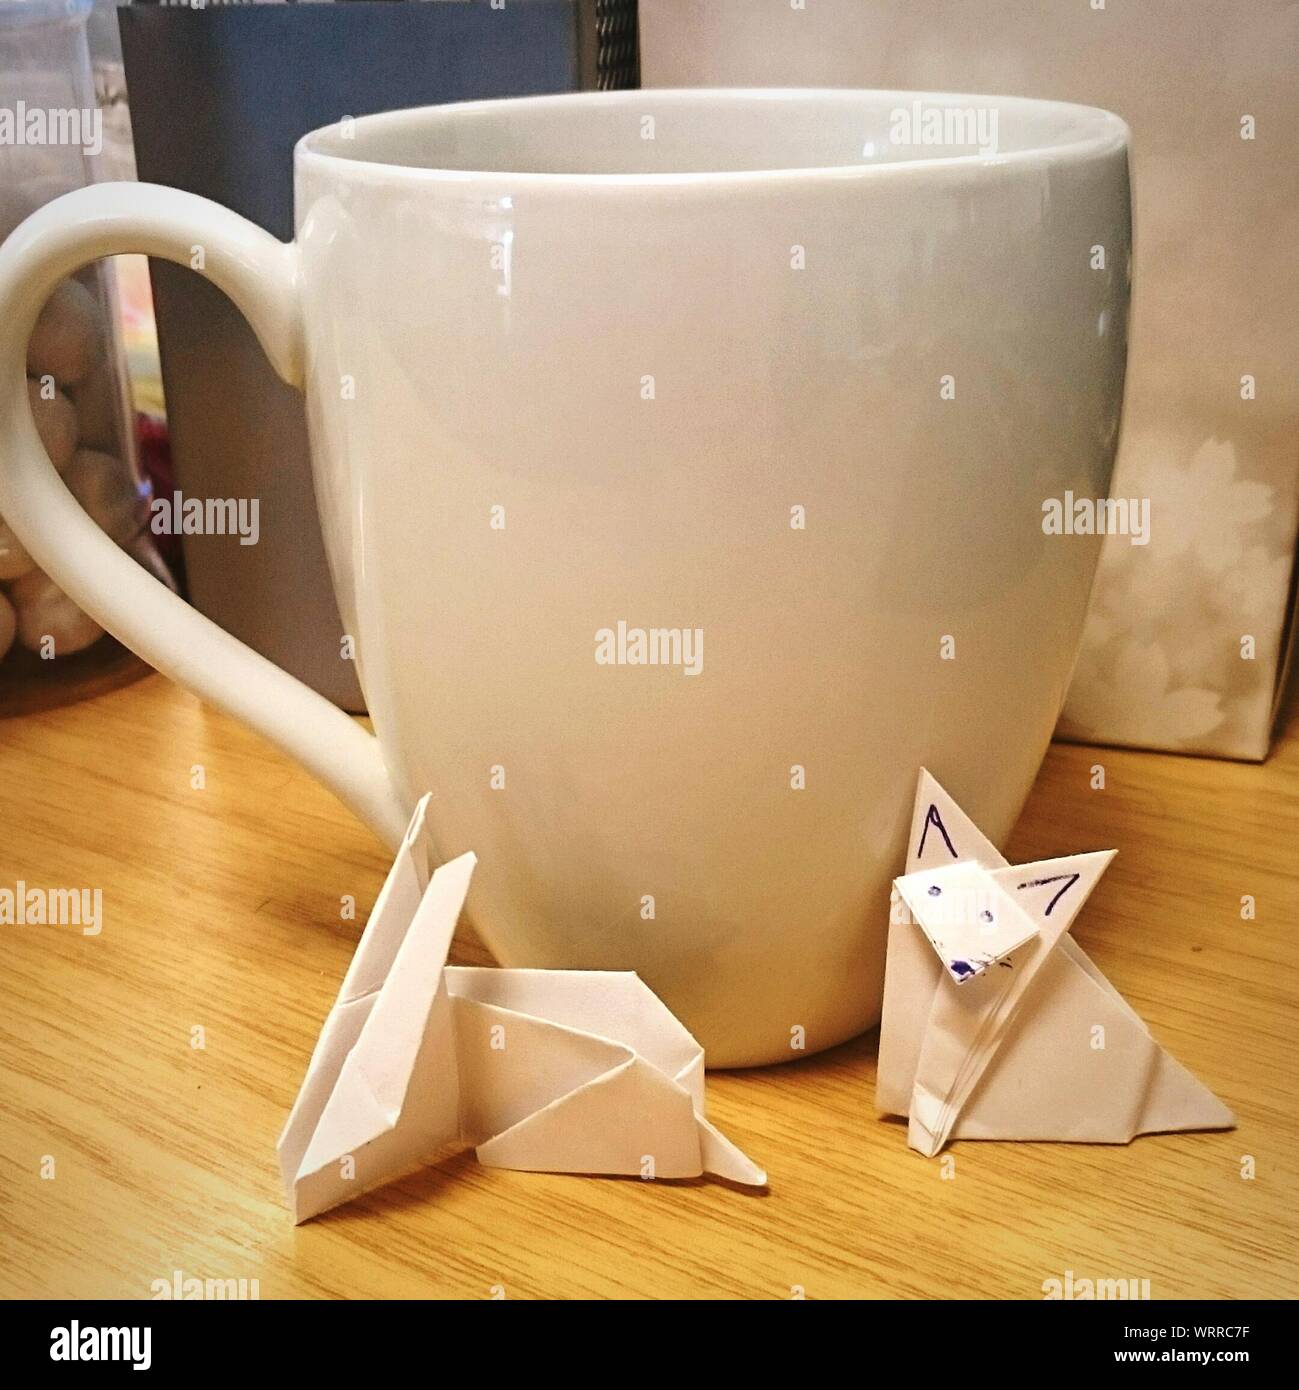 Paper Birds And Coffee Cup On Table Stock Photo